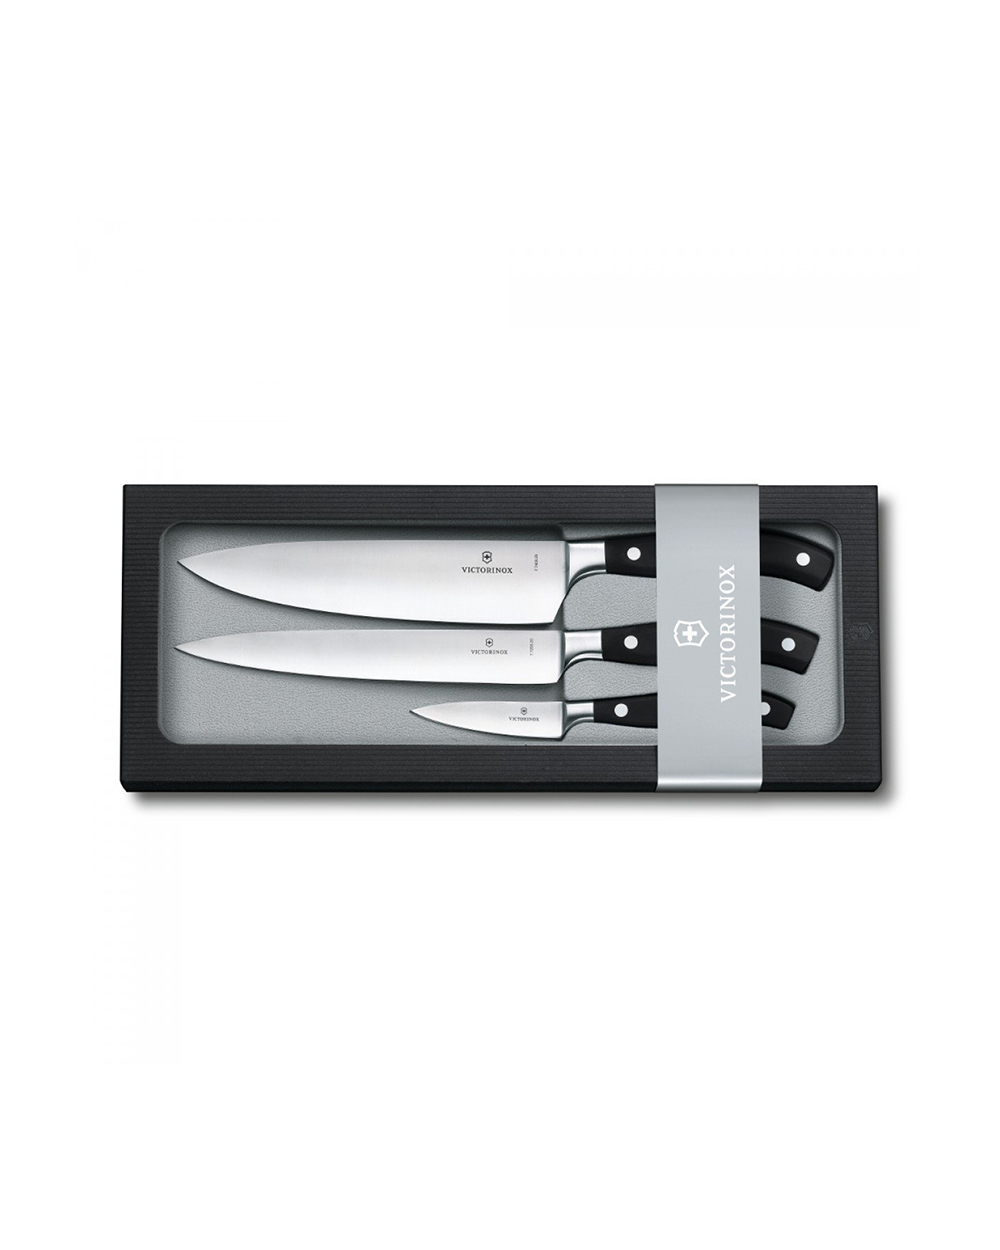 Victorinox Professional Forged Chef 3 piece knife set, $405, from Kitchenware Superstore.